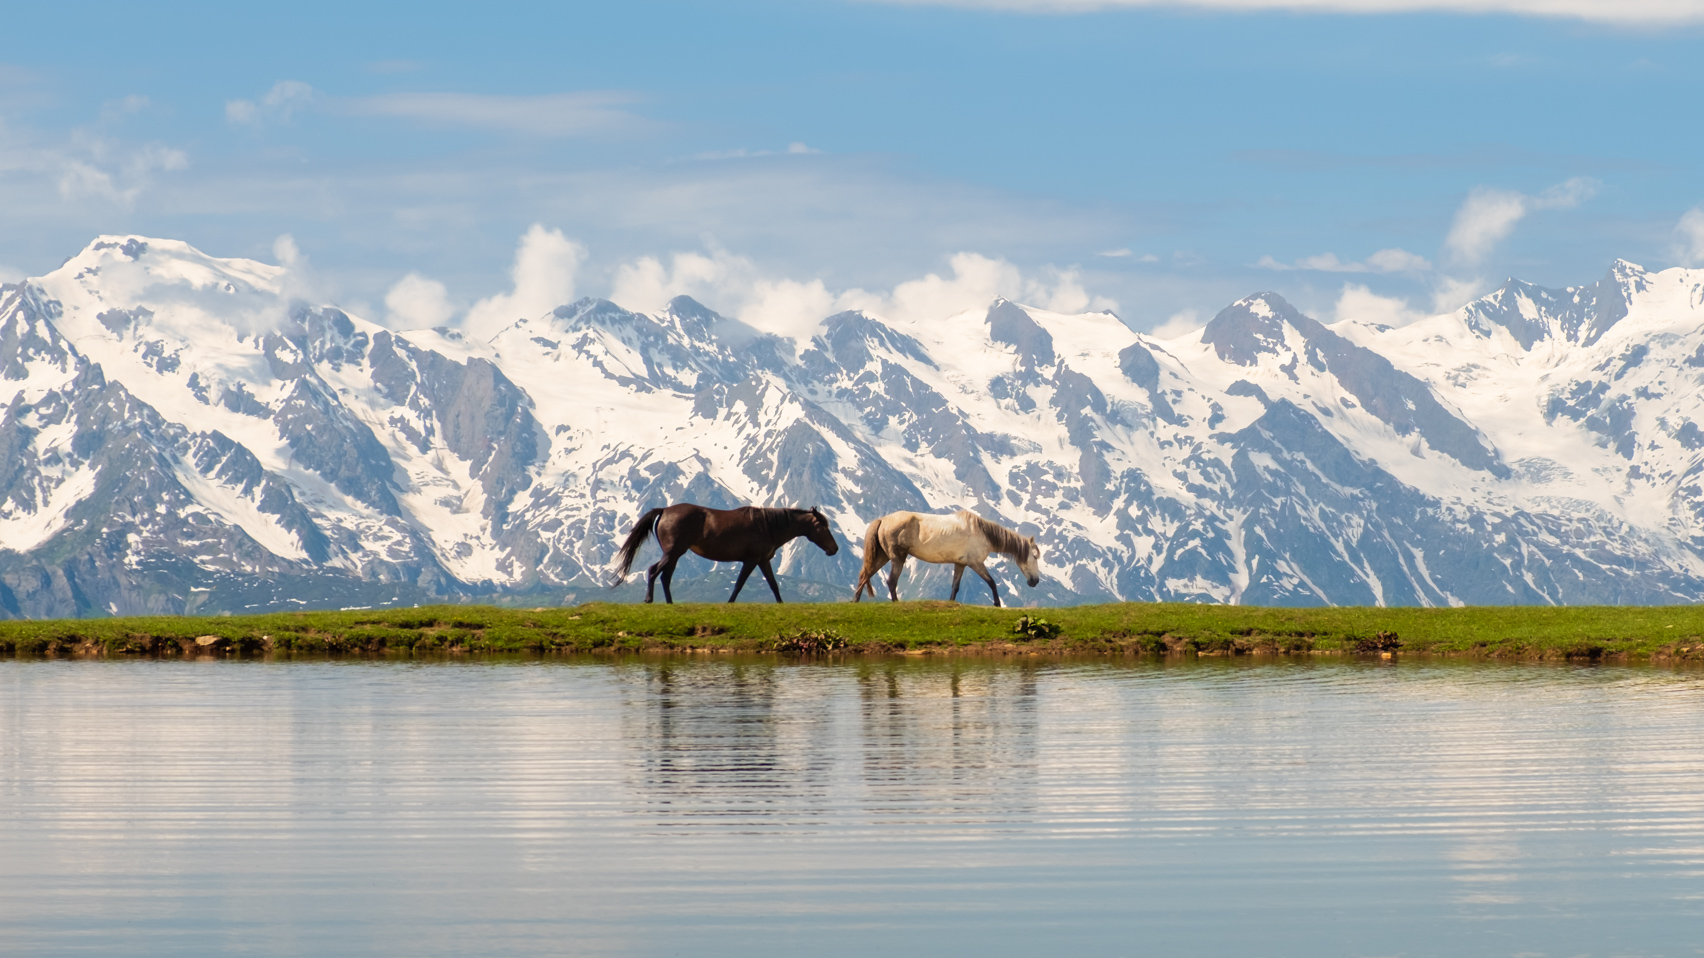 Idyllic scene with horses walking along a lake shore with snowy mountains in the background